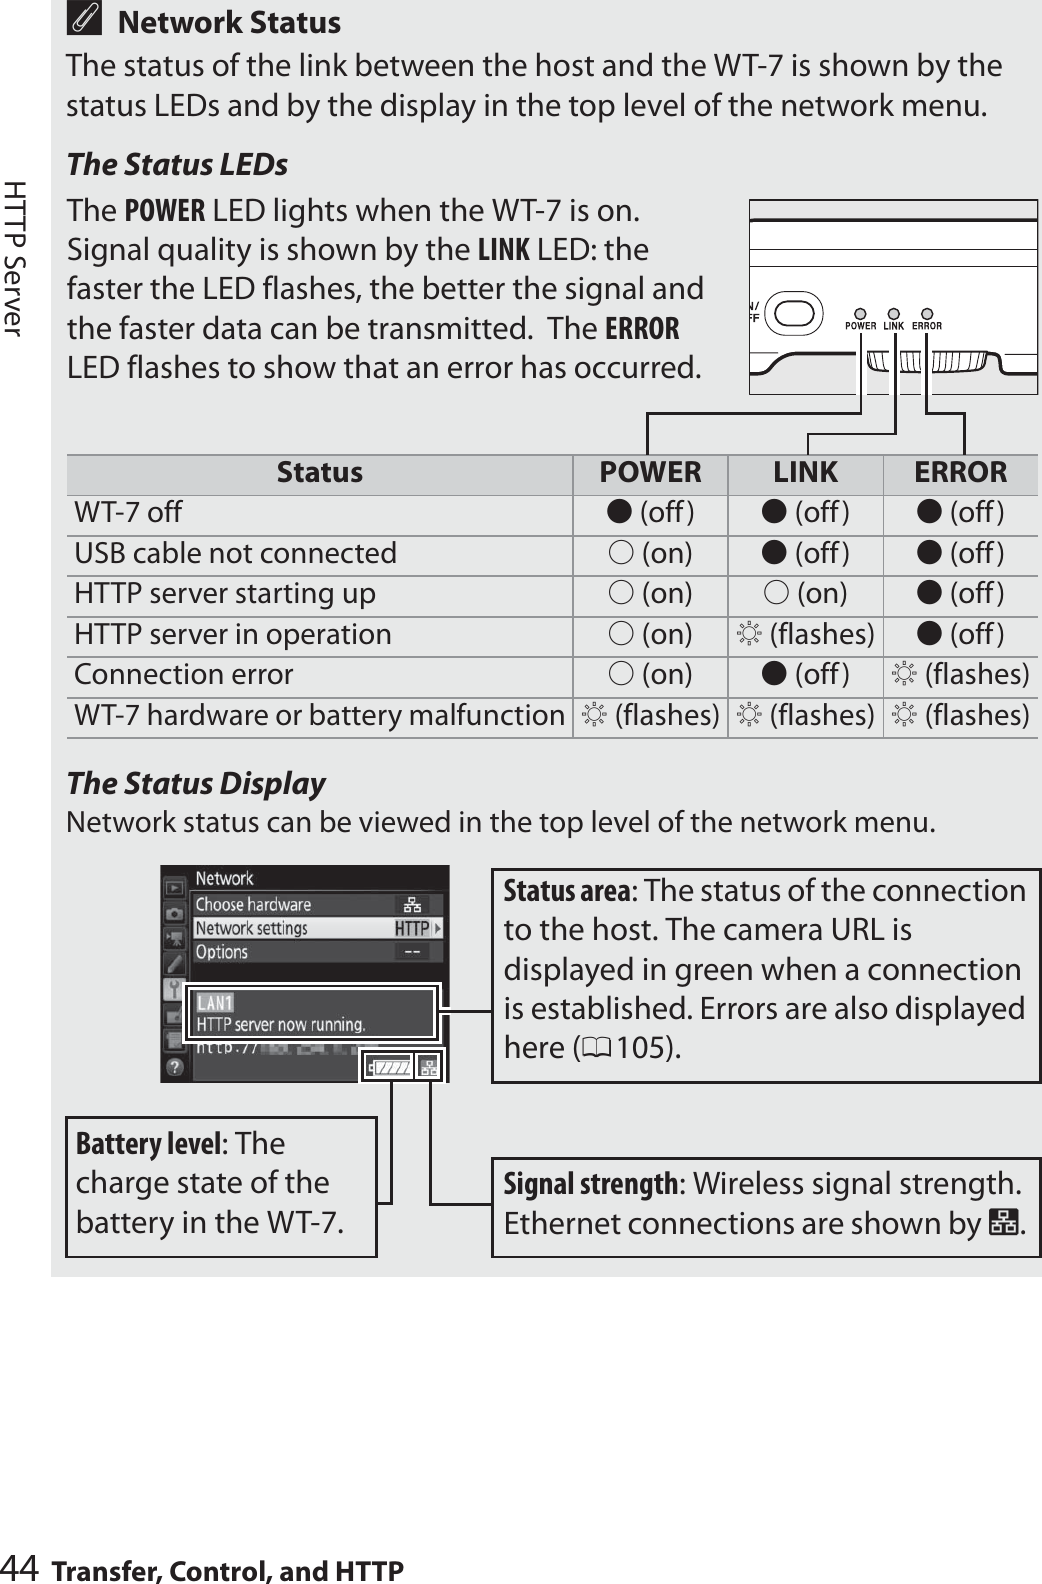 44 Transfer, Control, and HTTPHTTP ServerANetwork StatusThe status of the link between the host and the WT-7 is shown by the status LEDs and by the display in the top level of the network menu.The Status LEDsStatus POWER LINK ERRORWT-7 off I (off) I (off) I (off)USB cable not connected K (on) I (off) I (off)HTTP server starting up K (on) K (on) I (off)HTTP server in operation K (on) H (flashes) I (off)Connection error K (on) I (off) H (flashes)WT-7 hardware or battery malfunction H (flashes) H (flashes) H (flashes)The Status DisplayNetwork status can be viewed in the top level of the network menu.The POWER LED lights when the WT-7 is on. Signal quality is shown by the LINK LED: the faster the LED flashes, the better the signal and the faster data can be transmitted.  The ERROR LED flashes to show that an error has occurred.Signal strength: Wireless signal strength. Ethernet connections are shown by d. Status area: The status of the connection to the host. The camera URL is displayed in green when a connection is established. Errors are also displayed here (0105).Battery level: The charge state of the battery in the WT-7.